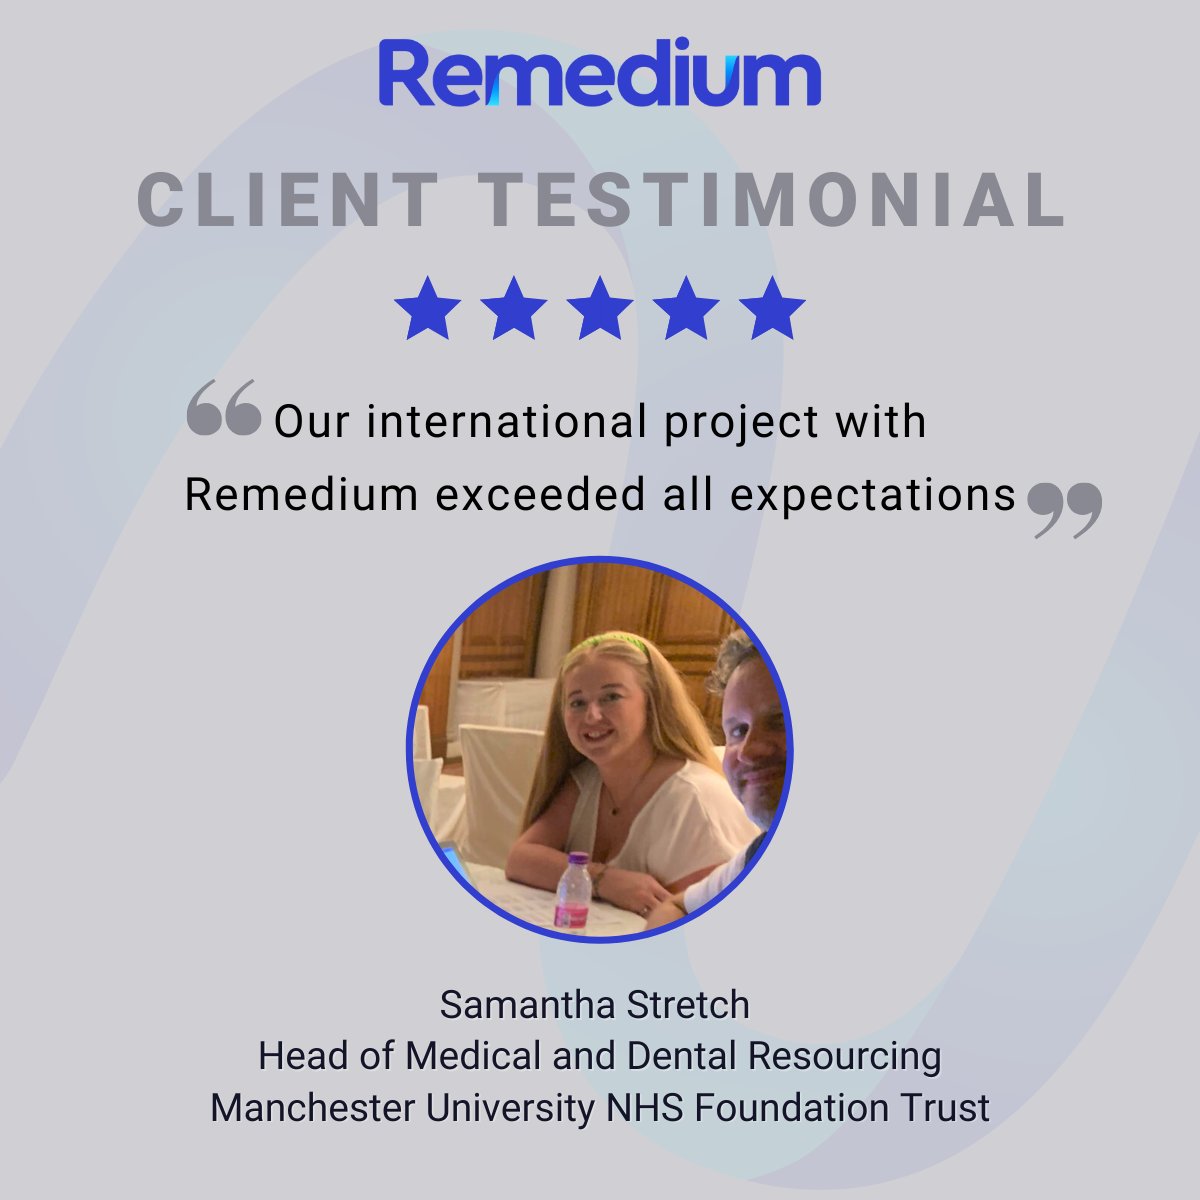 We worked with Manchester University NHS Foundation Trust to implement a face-to-face international recruitment drive for doctors in Mumbai. Watch our latest case study video to find out more ➡️remediumpartners.com/client-case-st…

#nhstrust #clienttestmonial #internationaldoctors #manchester